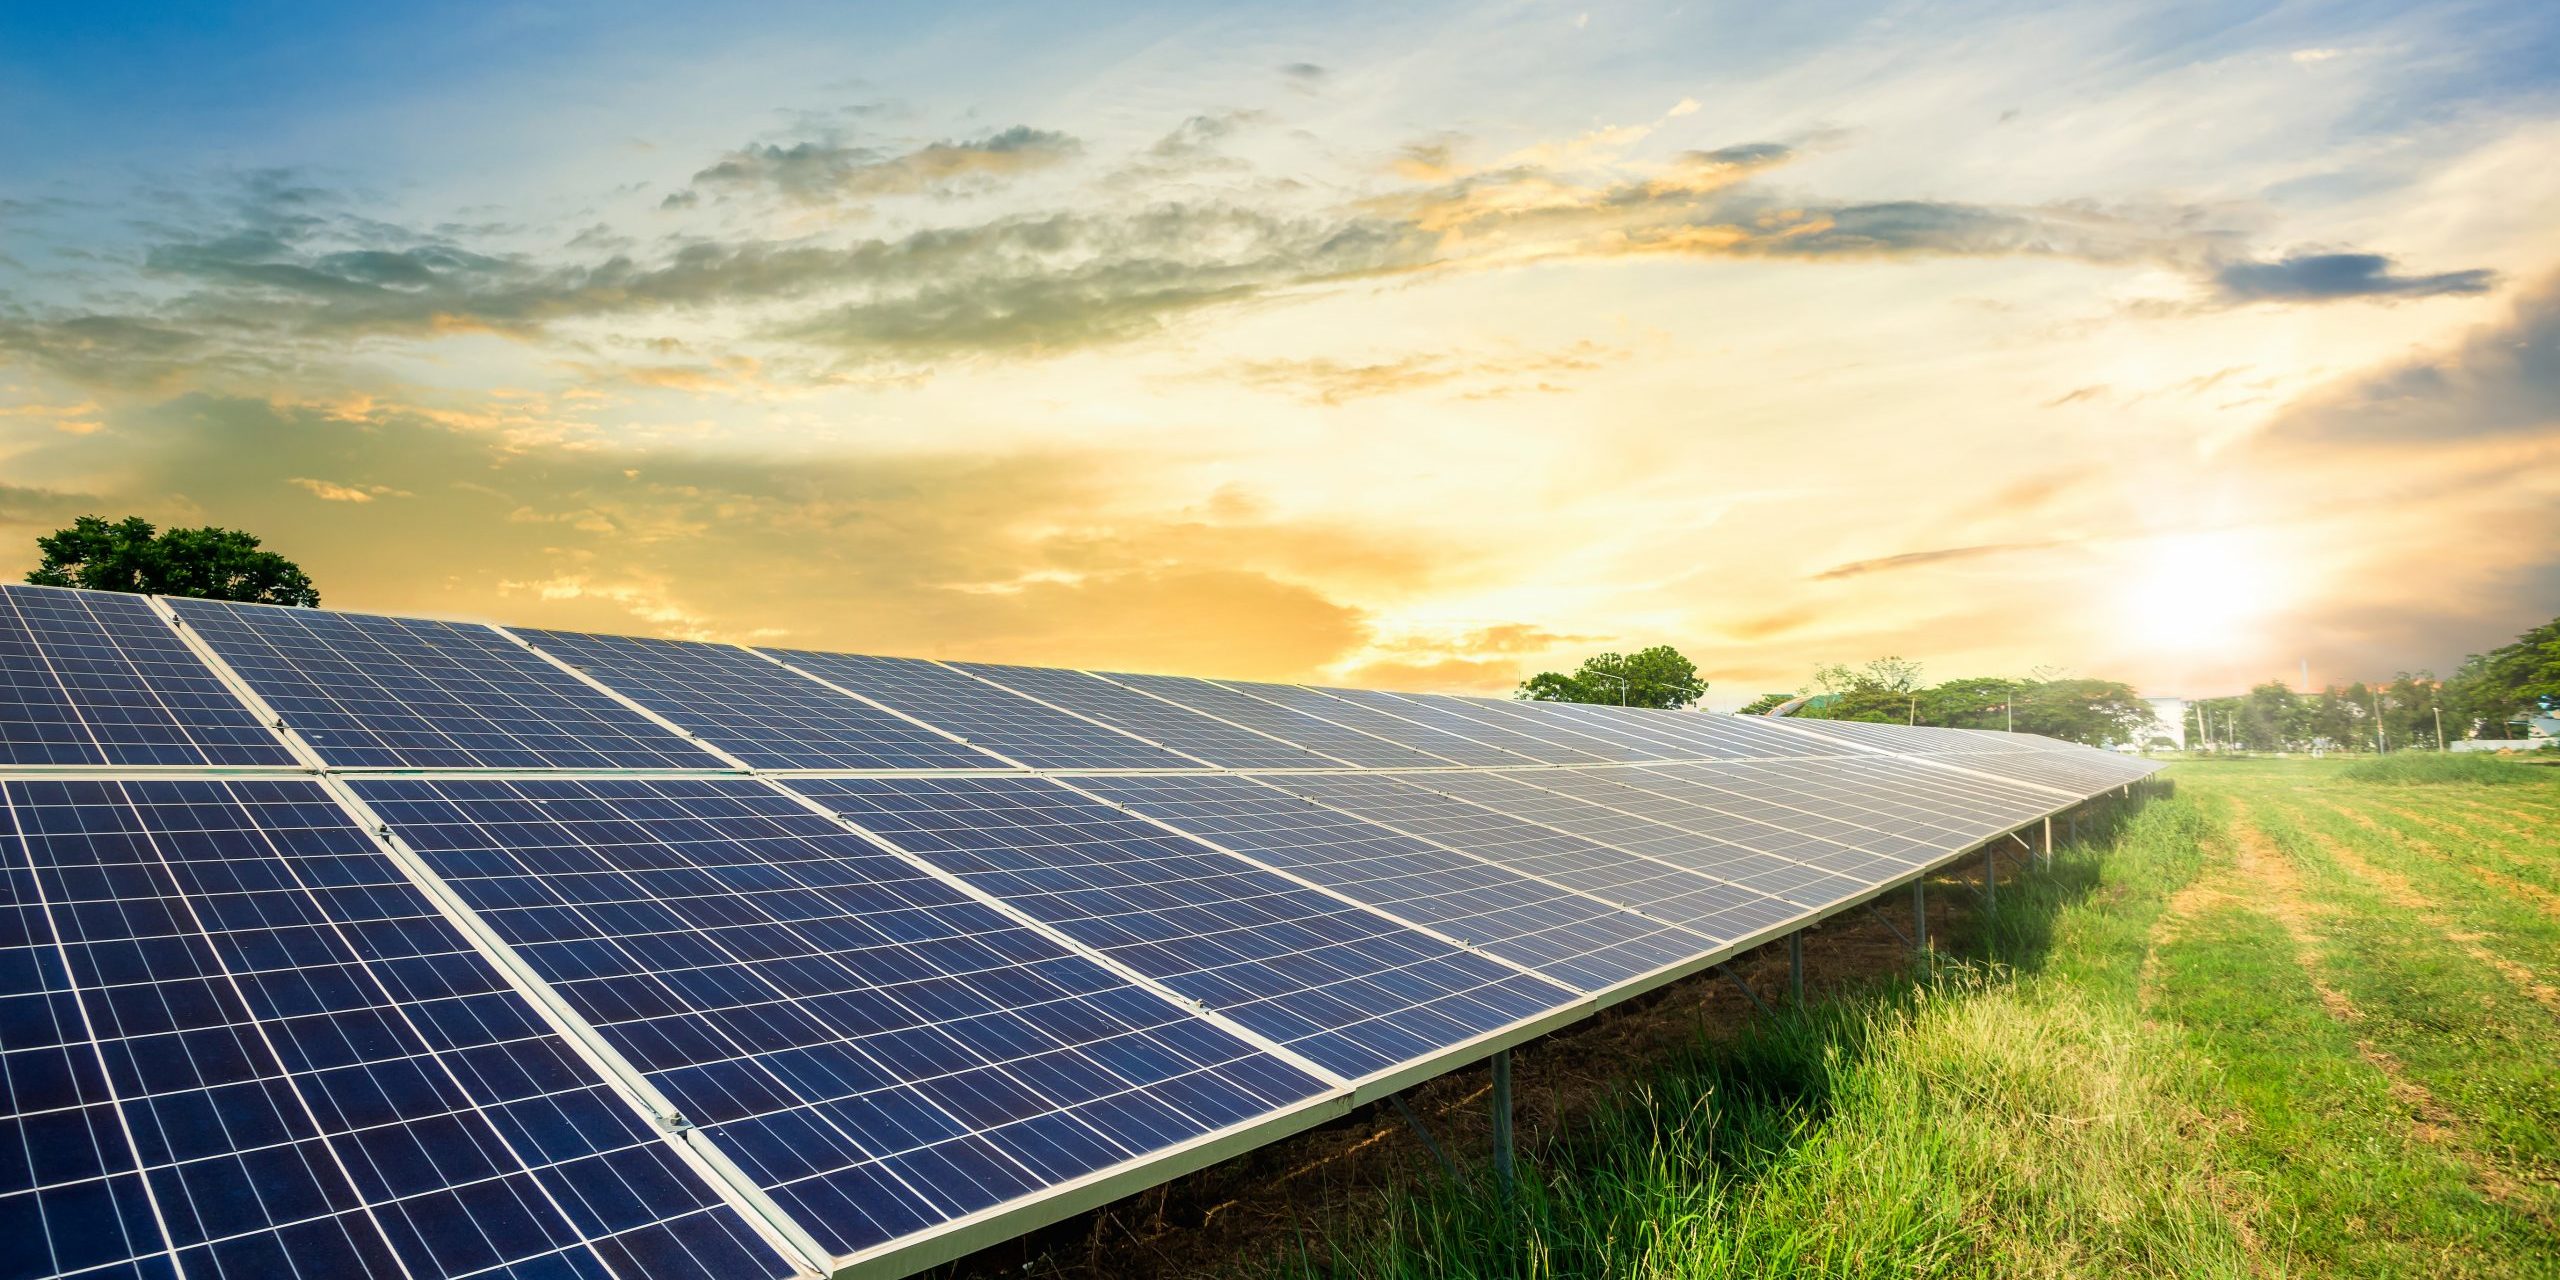 11 Benefits of Solar Energy You May Not Know About